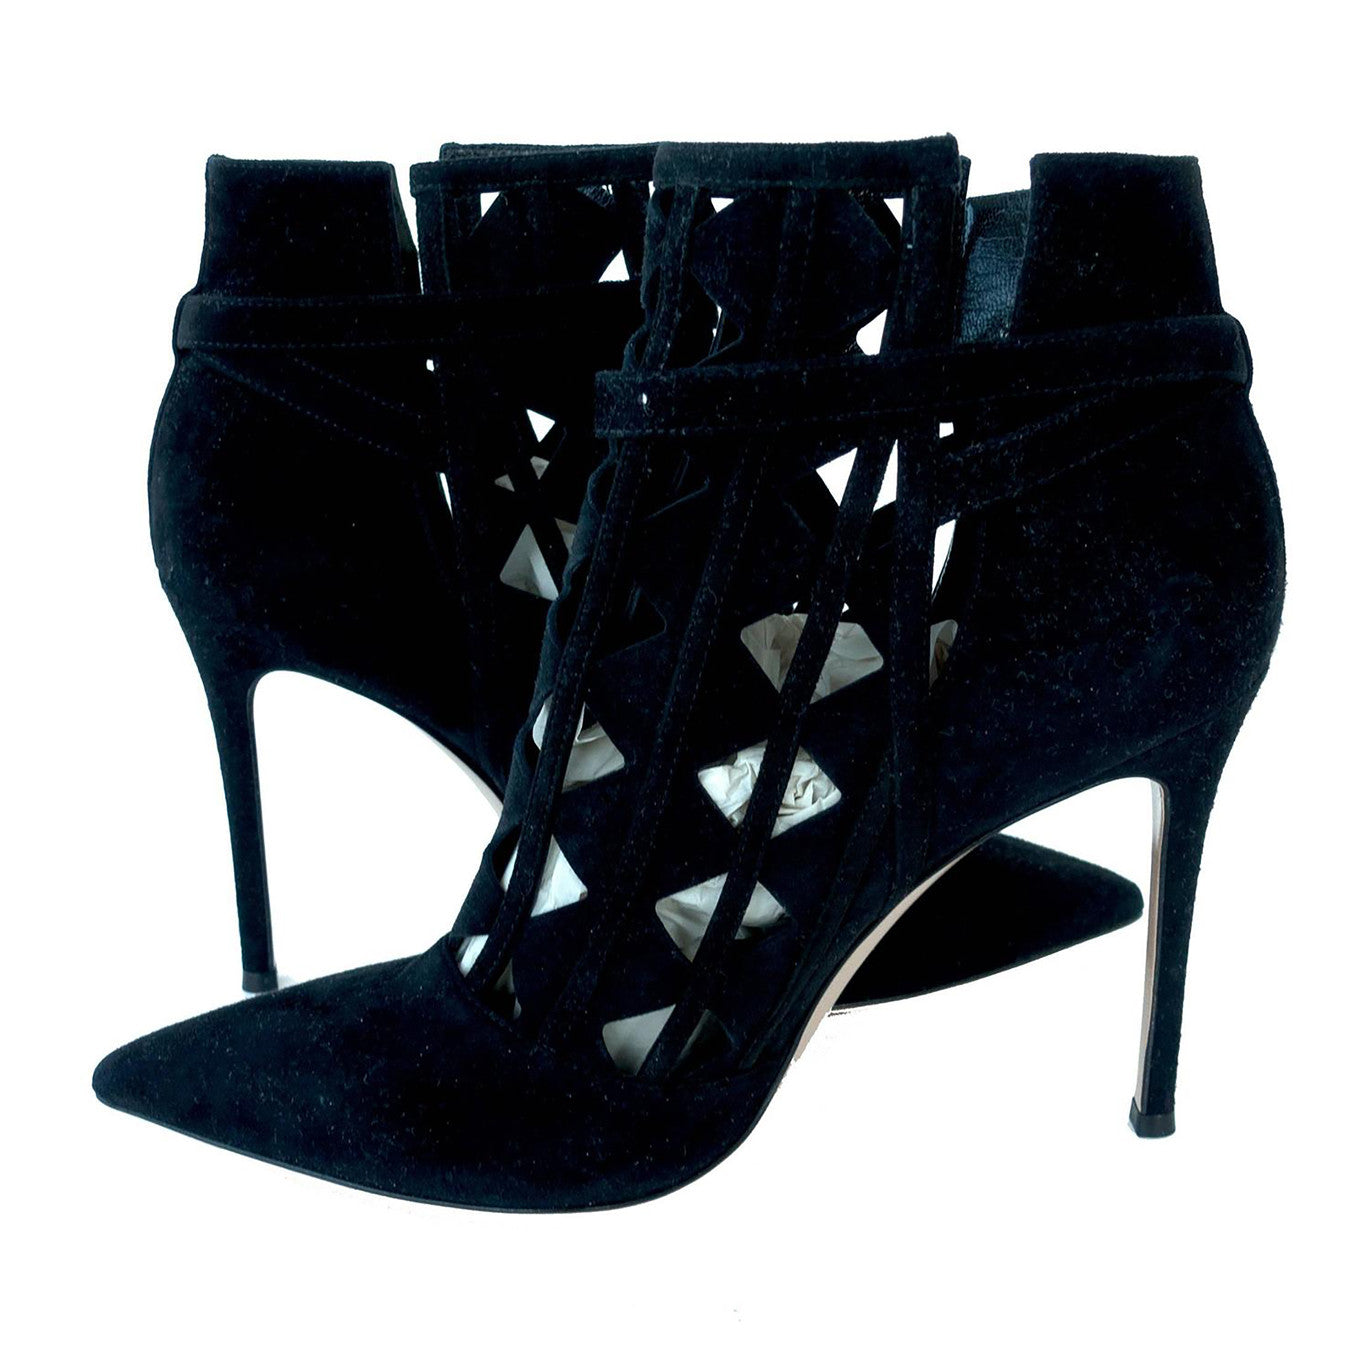 Gianvito Rossi Cutout Black Suede High Ankle Bootie Chic size 40.5 - Chicjoy